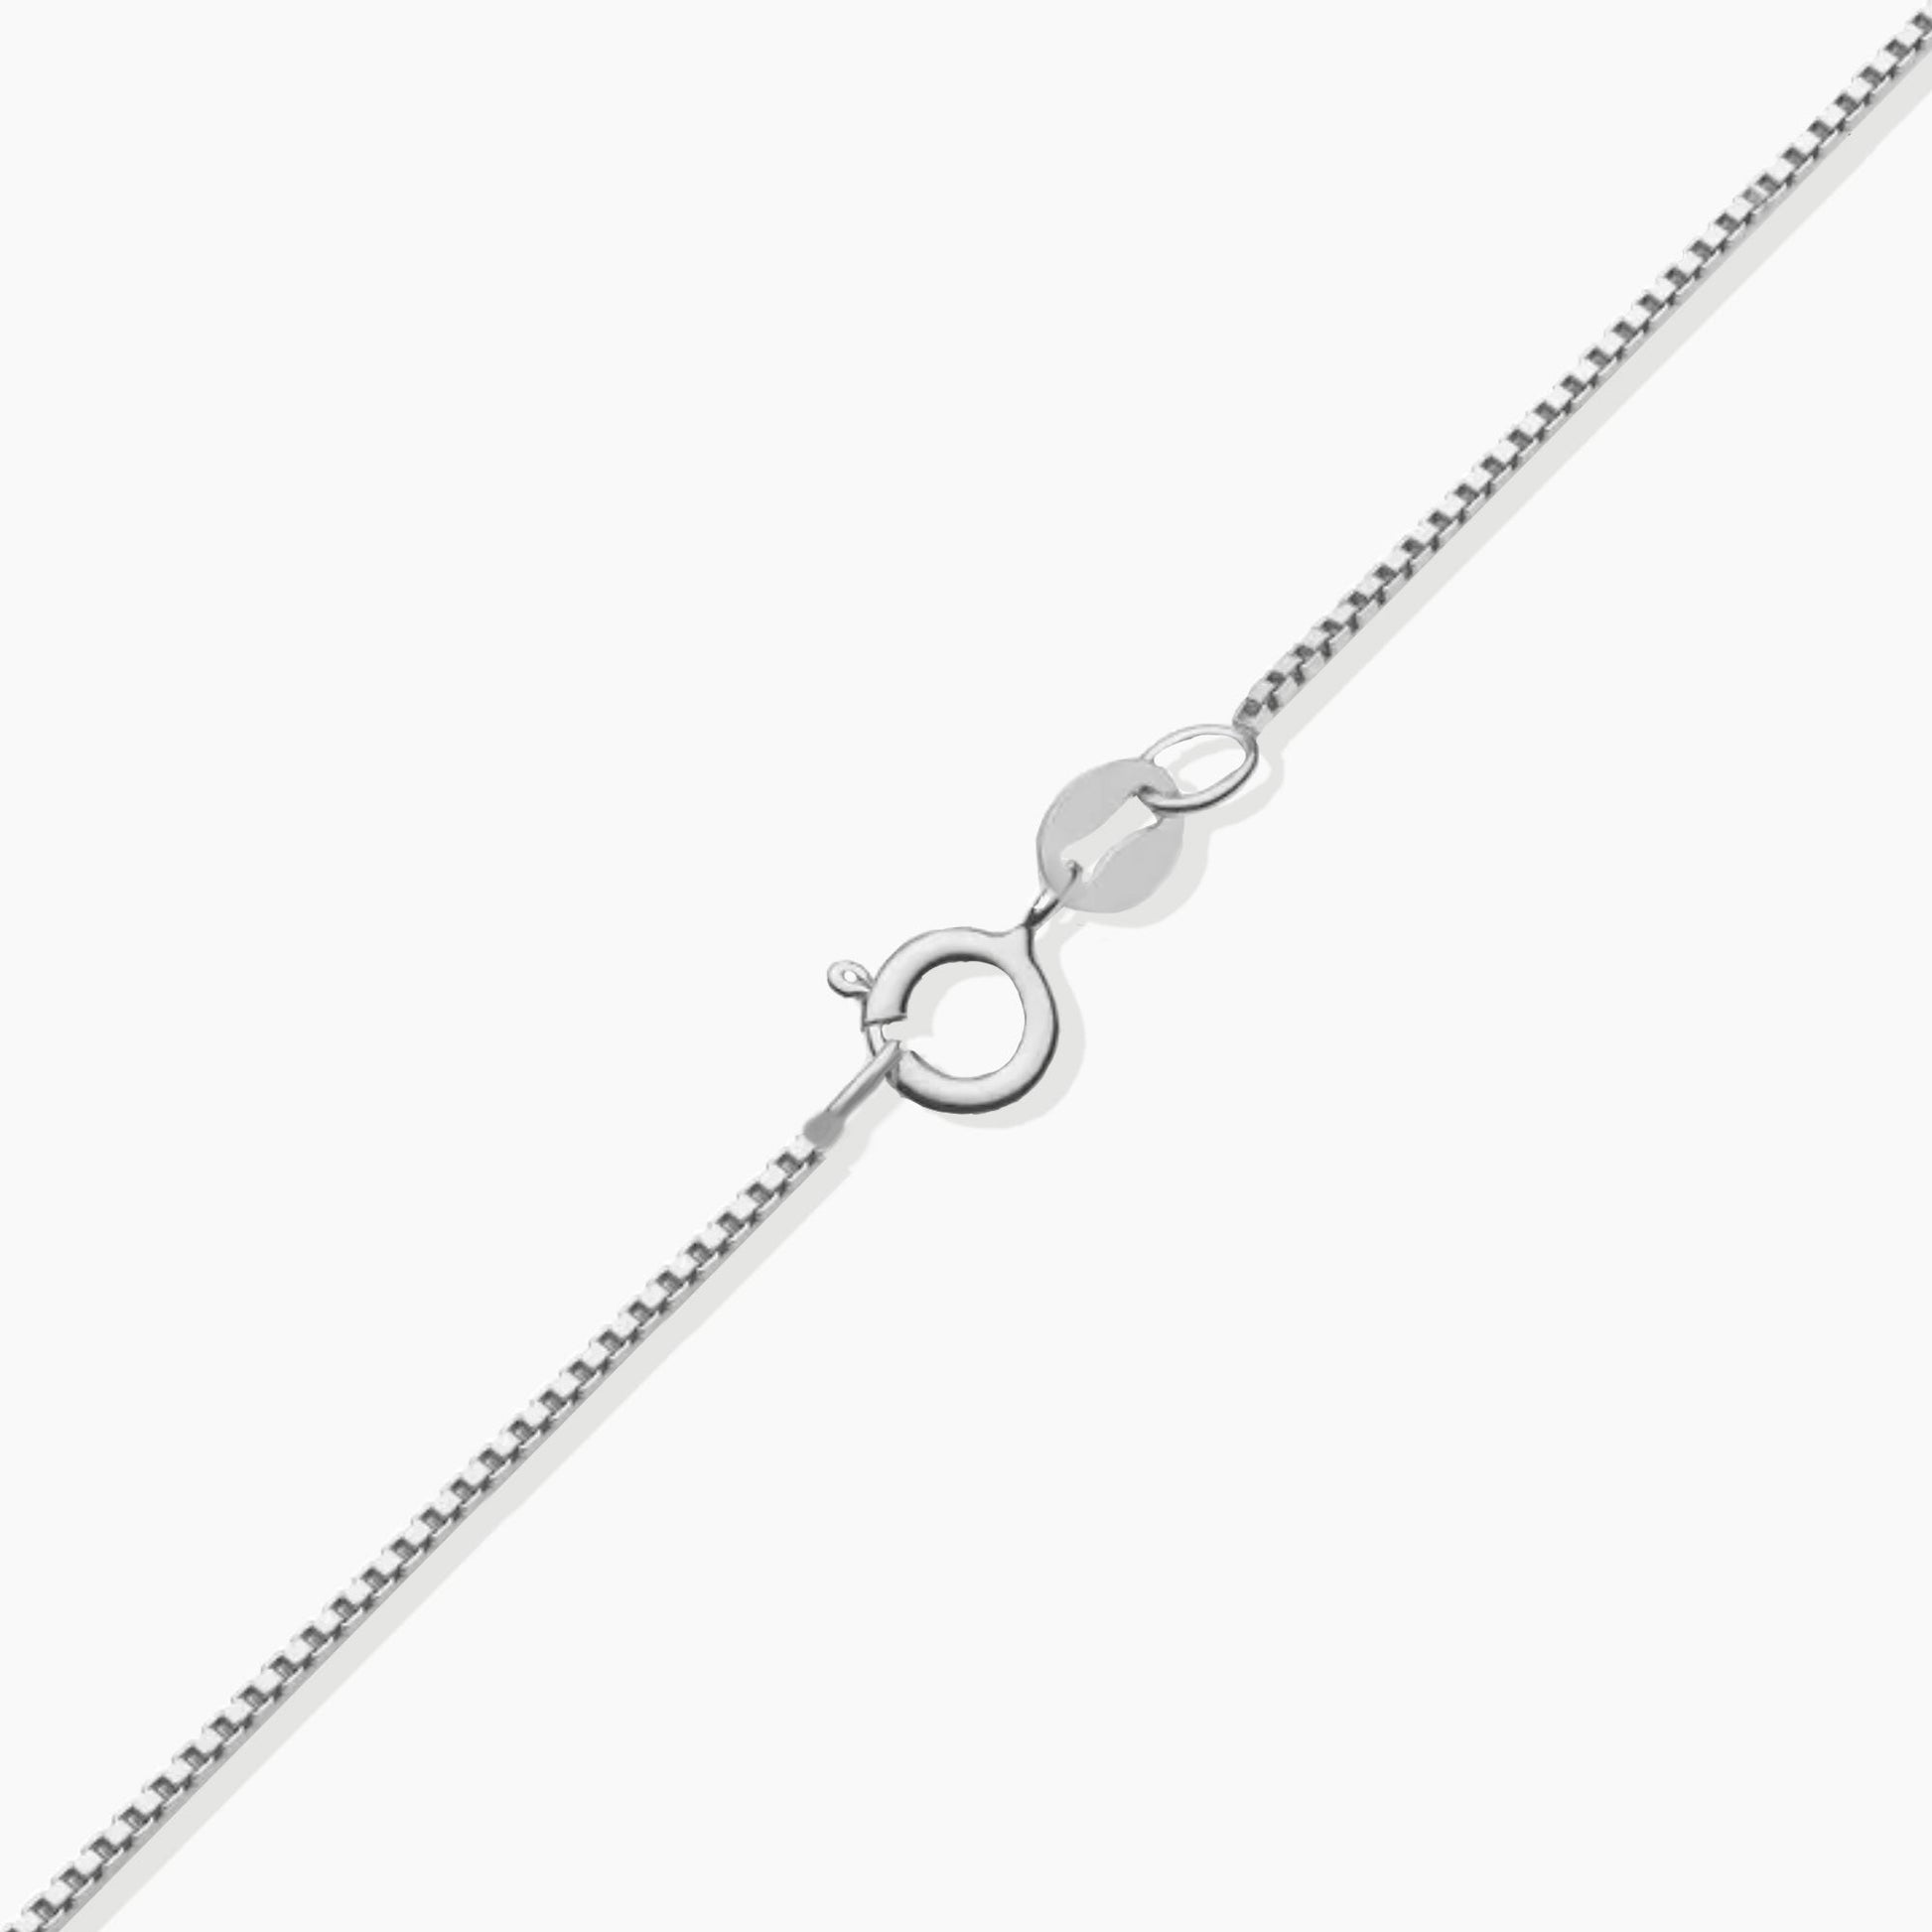 Silver box chain with spring clasp for Round Cut London Blue Topaz Pendant